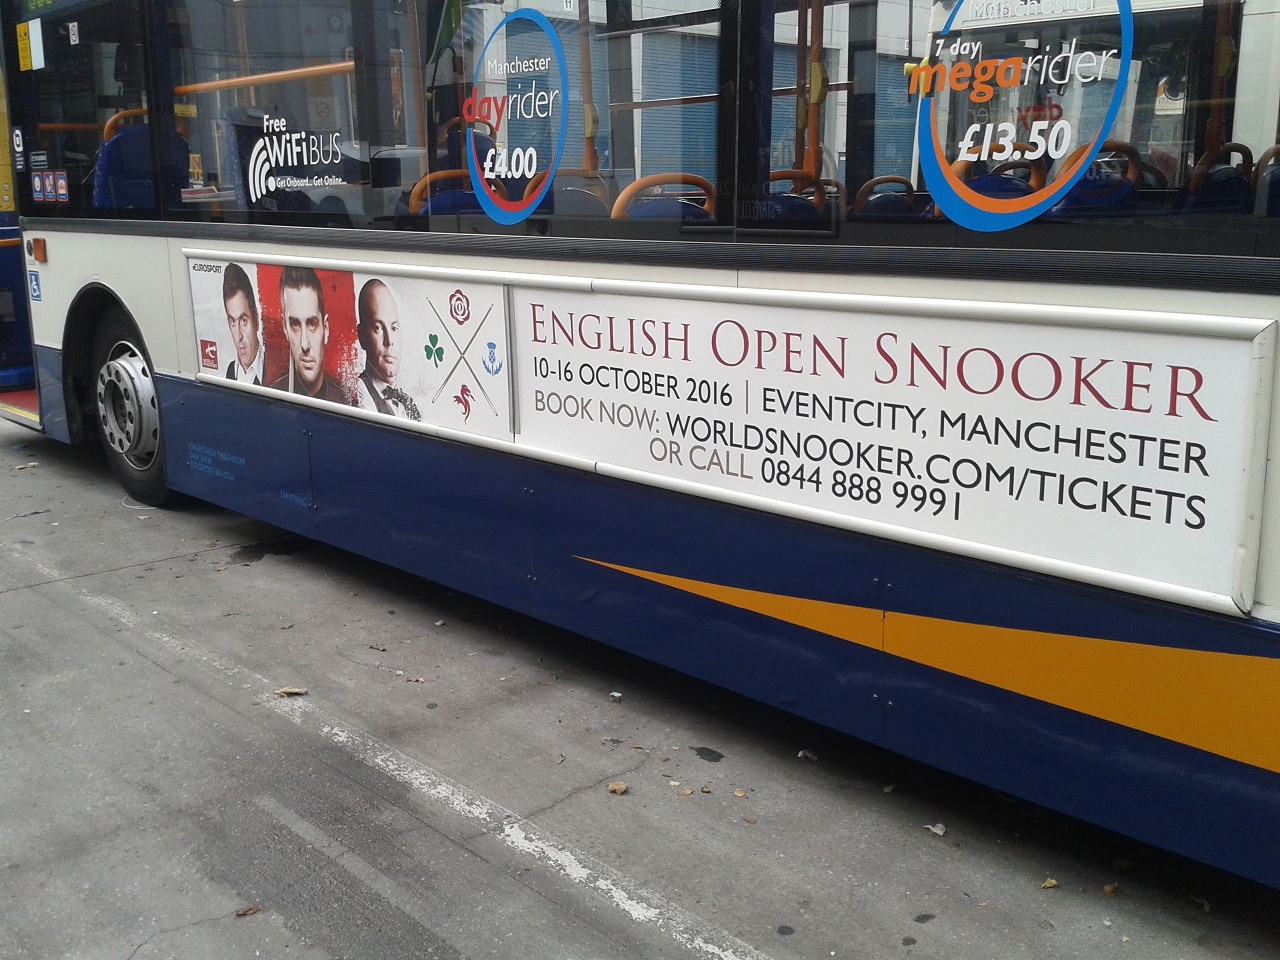 World Snooker Bus Advertising Campaign